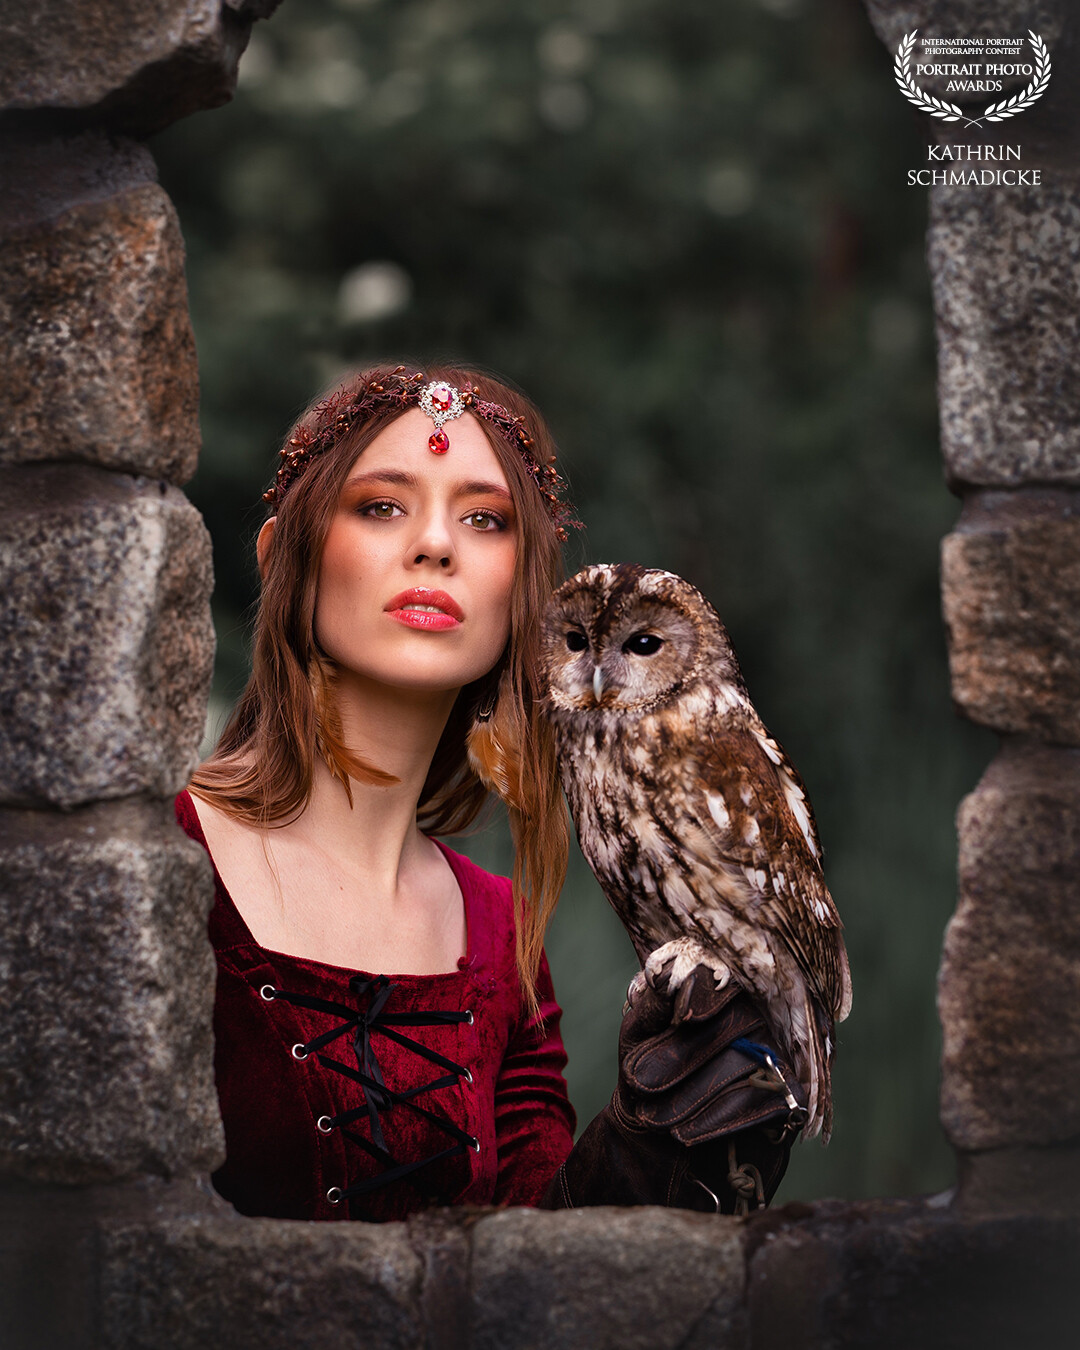 Telling fantasy worlds in a new way, capturing moments that tell their own stories and put an expressive focus on the special, that's what makes special portrait photography!